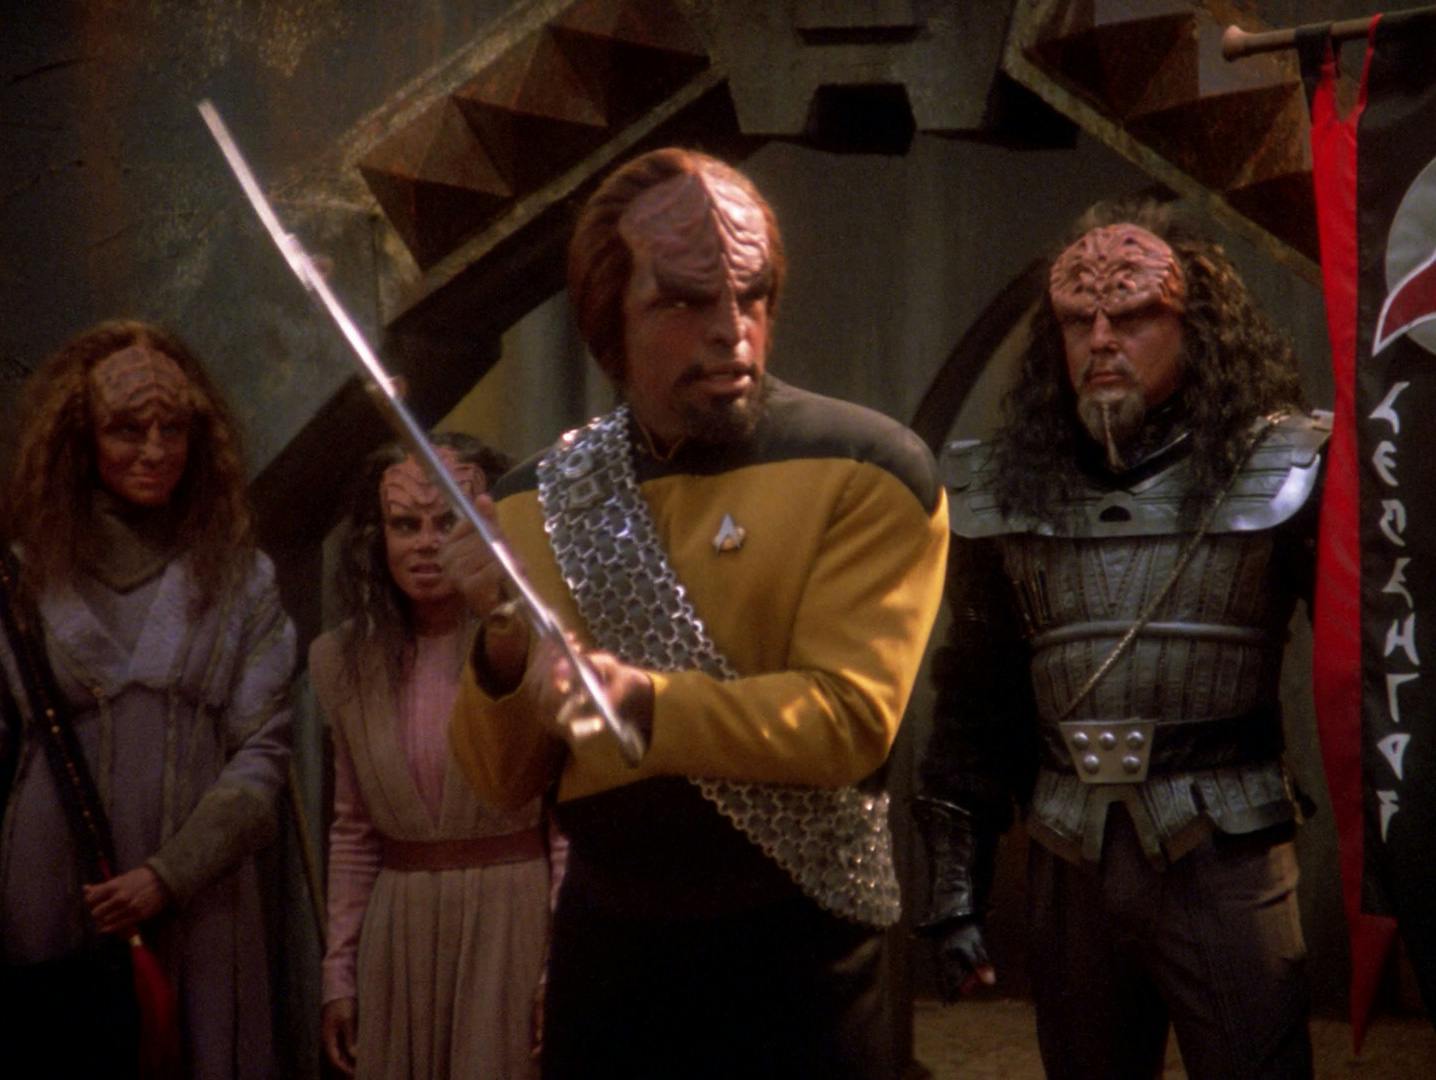 Worf challenges the actor playing Molor at the kot'baval festival to a bat'leth duel that is heightened by their grunting operatic interludes in 'Firstborn'